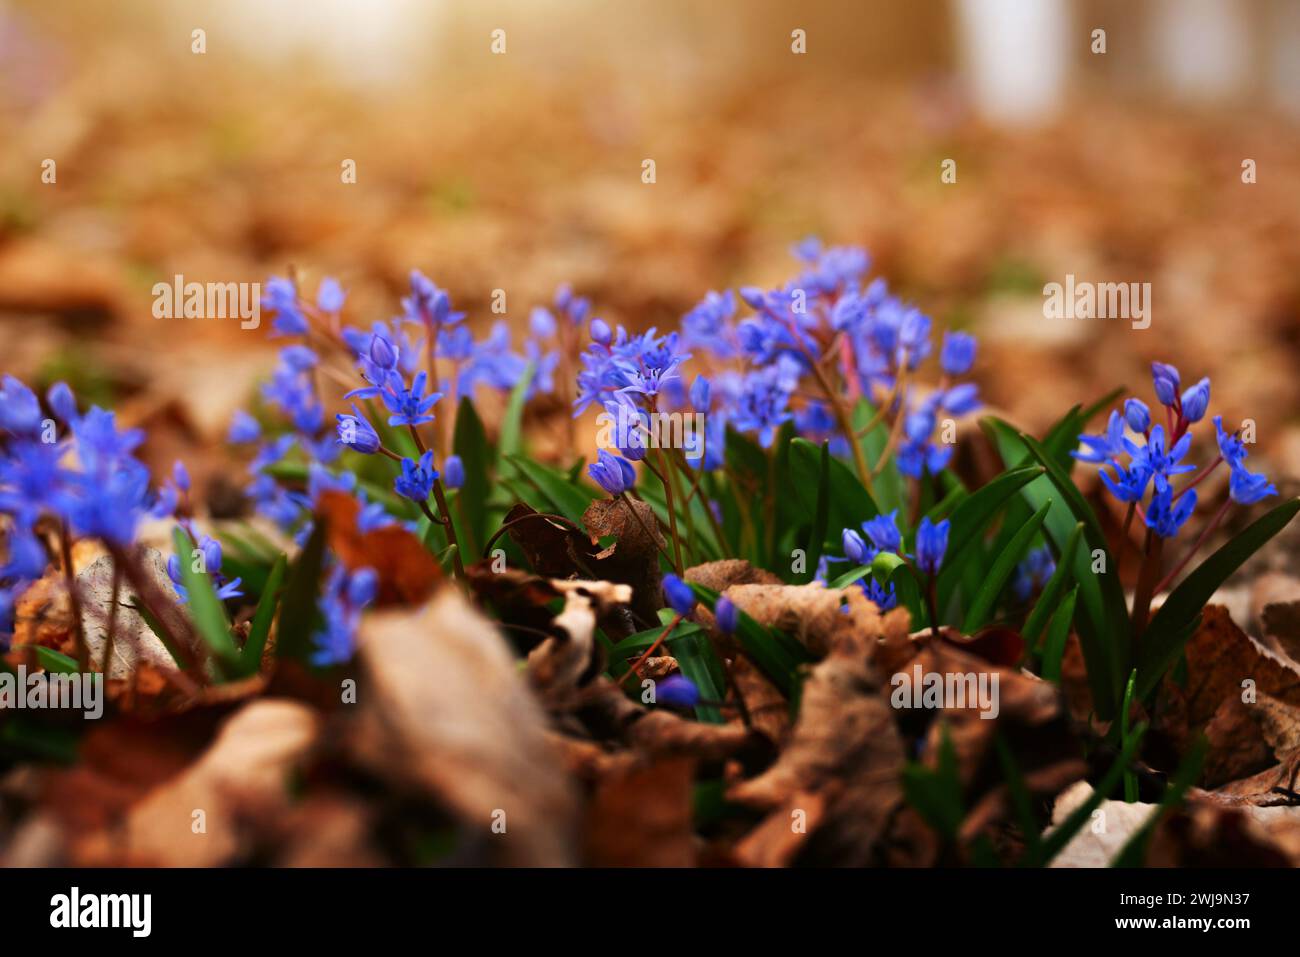 Spring early flowers Scilla siberica in the forest among old leaves Stock Photo